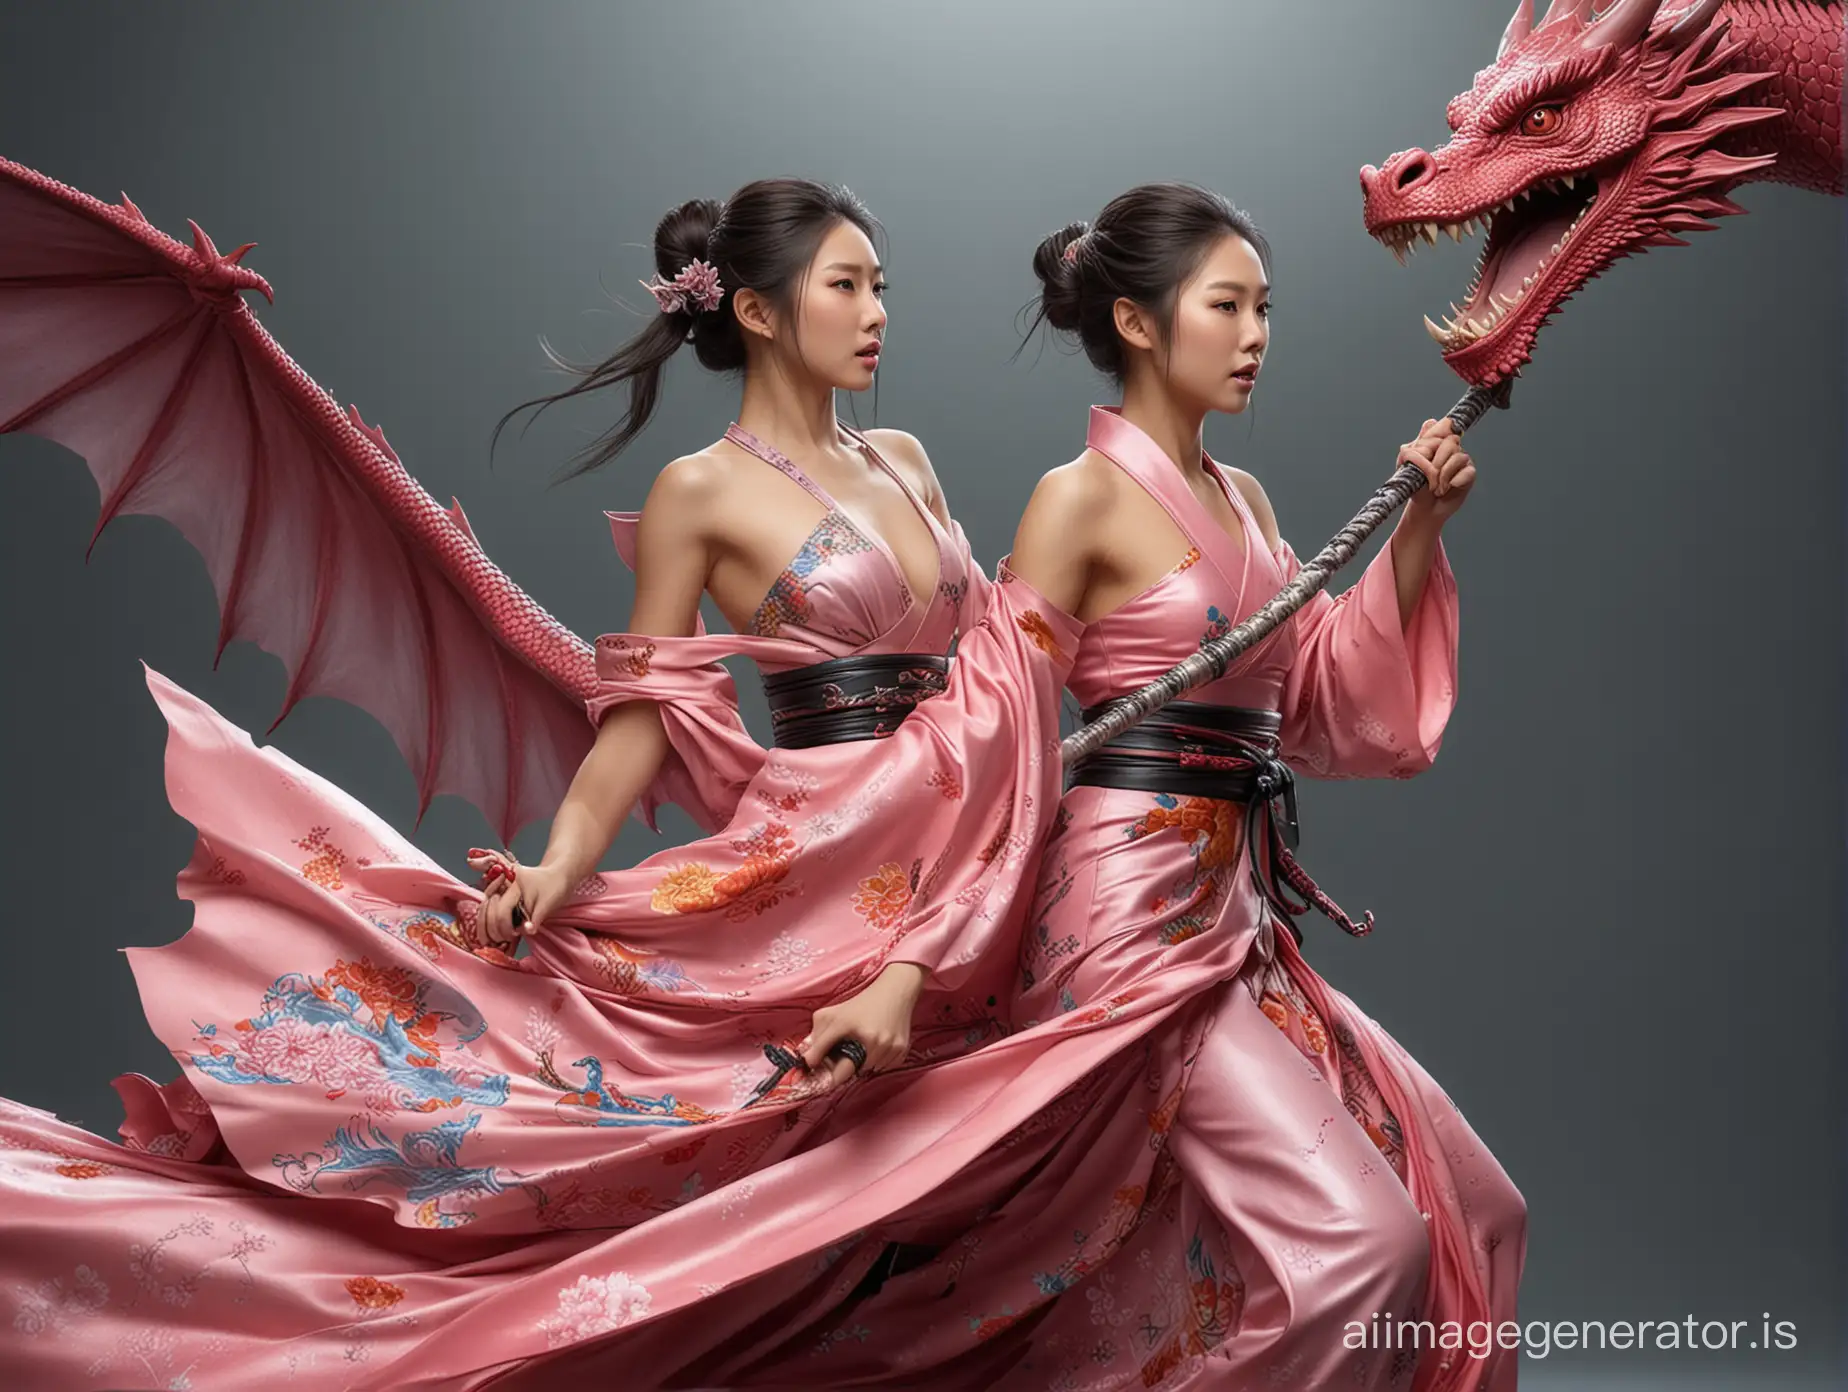 Ultrarealistic. Photorealistic. Japanese top model princess riding a flying dragon. Katanas in her hands. Her long dress is untied. She is topless. Vivid colors.